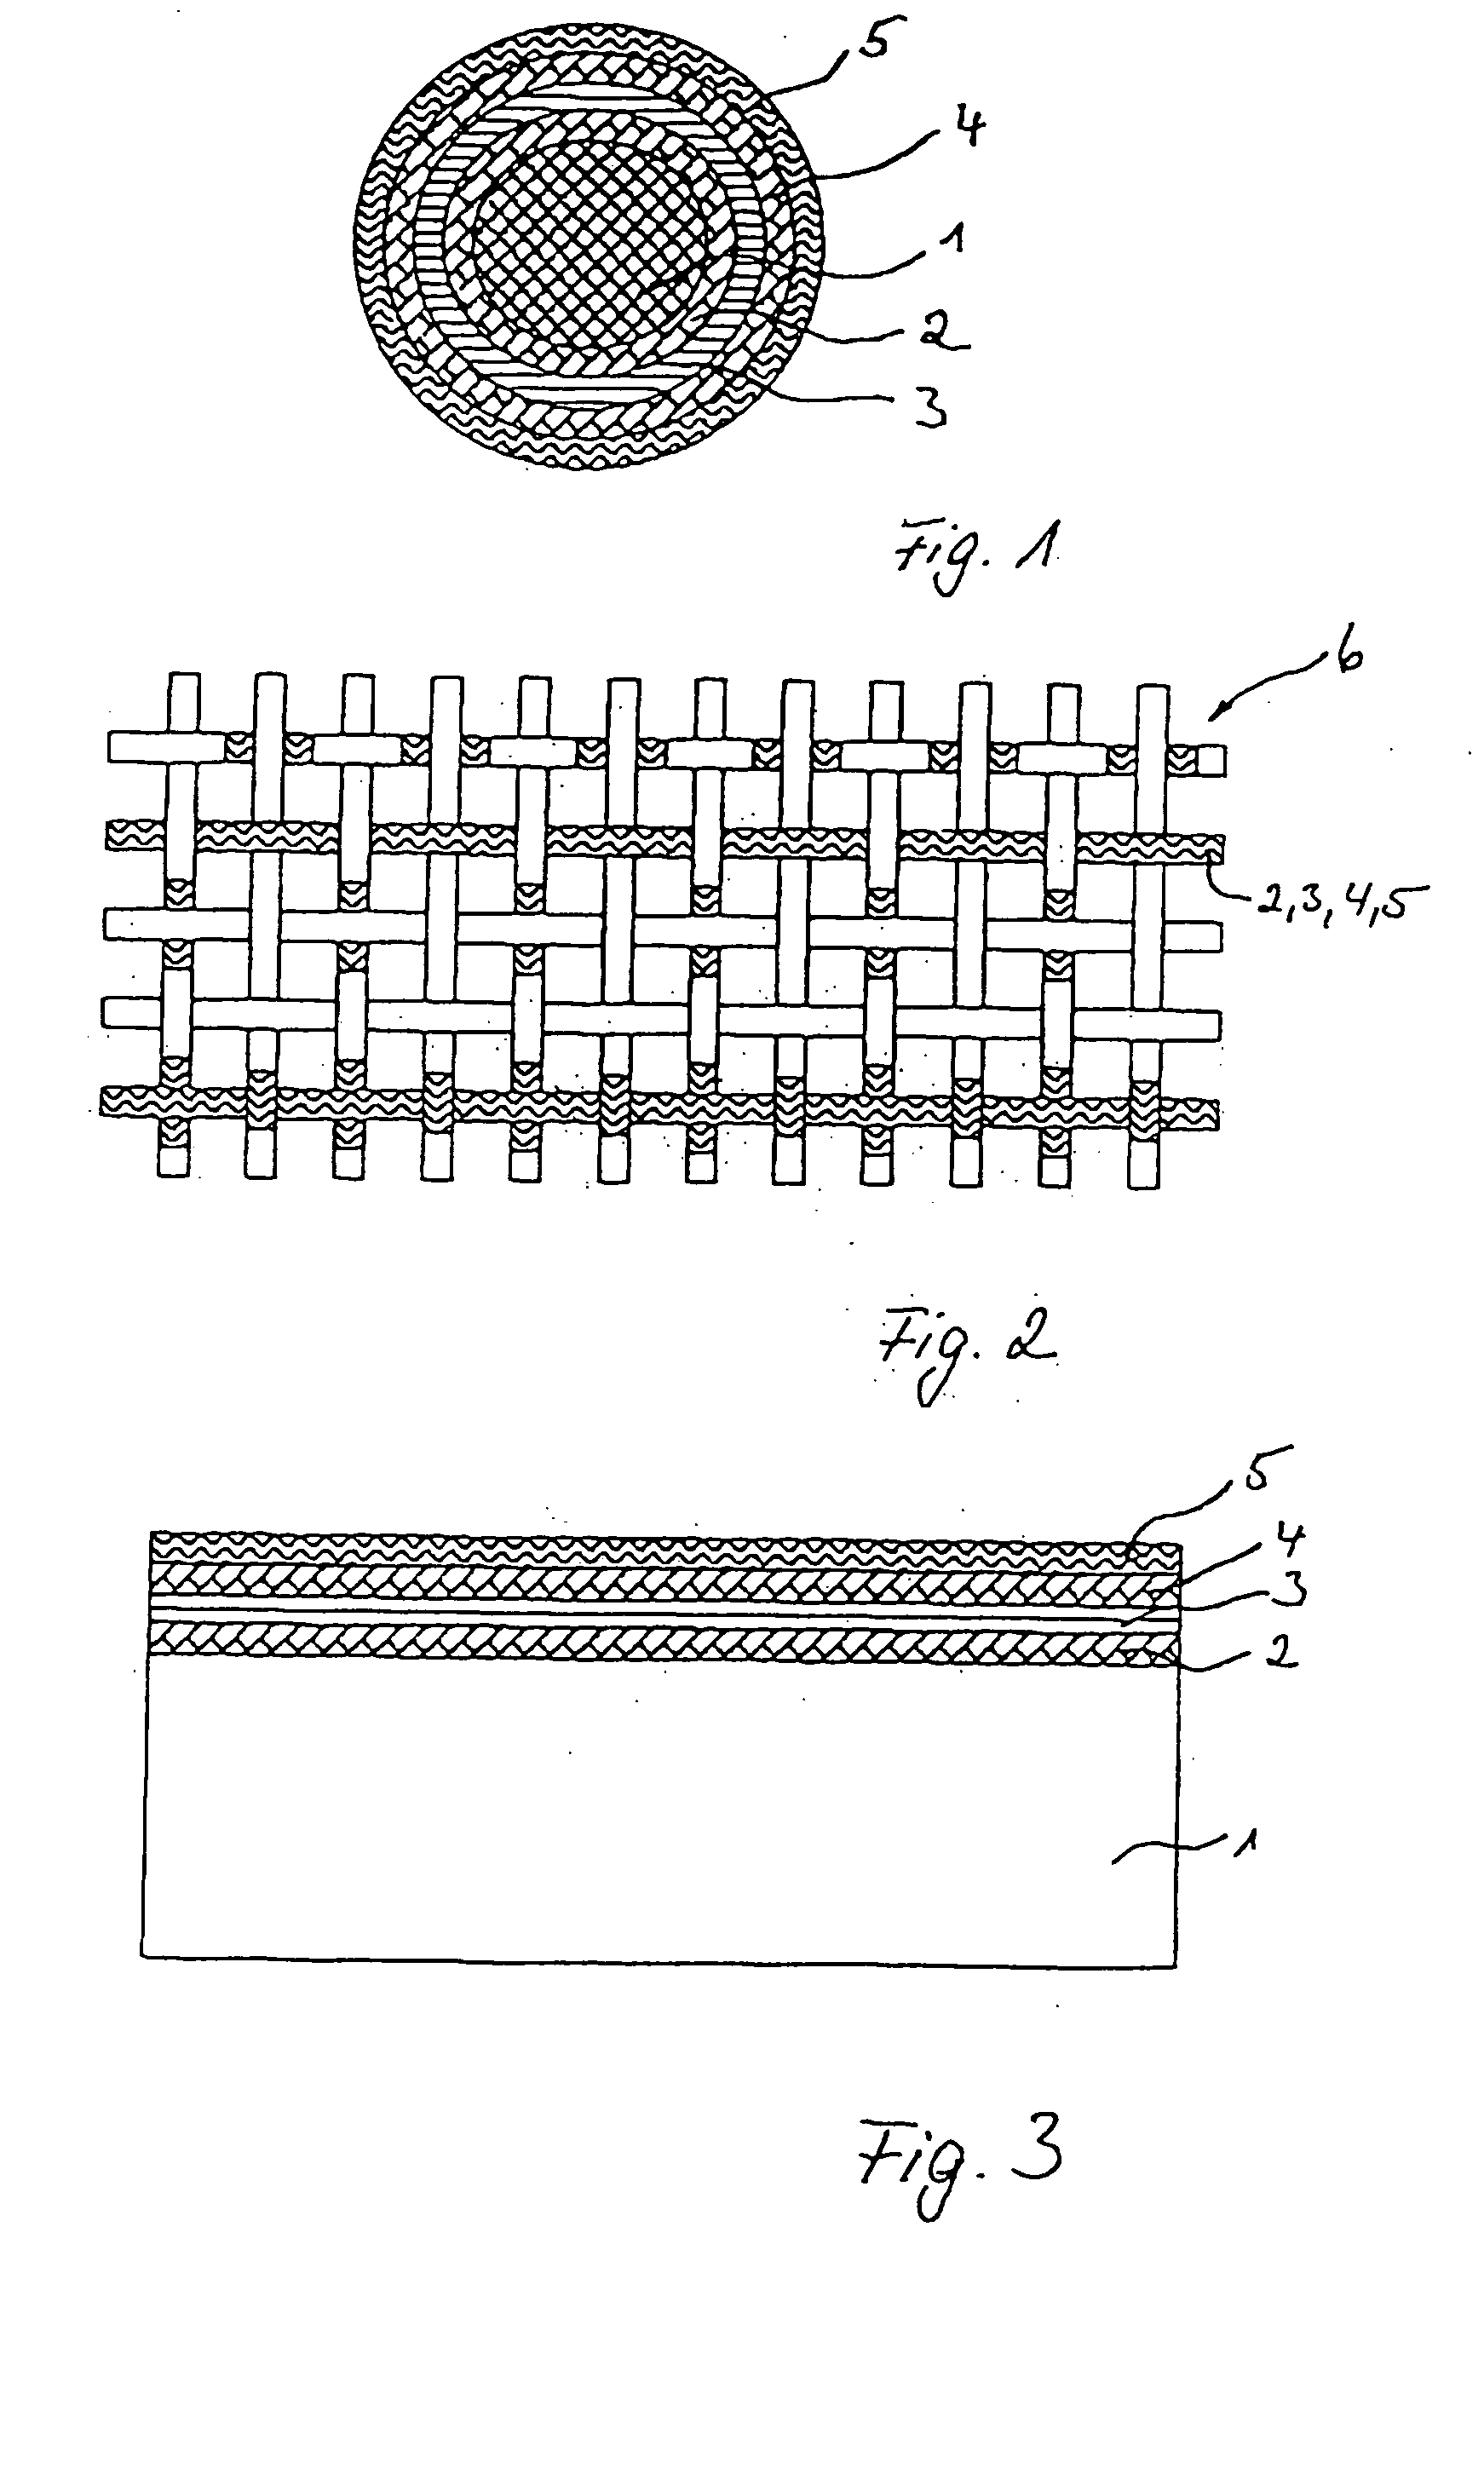 Textile product having an integrated sensor for measuring pressure and temperature